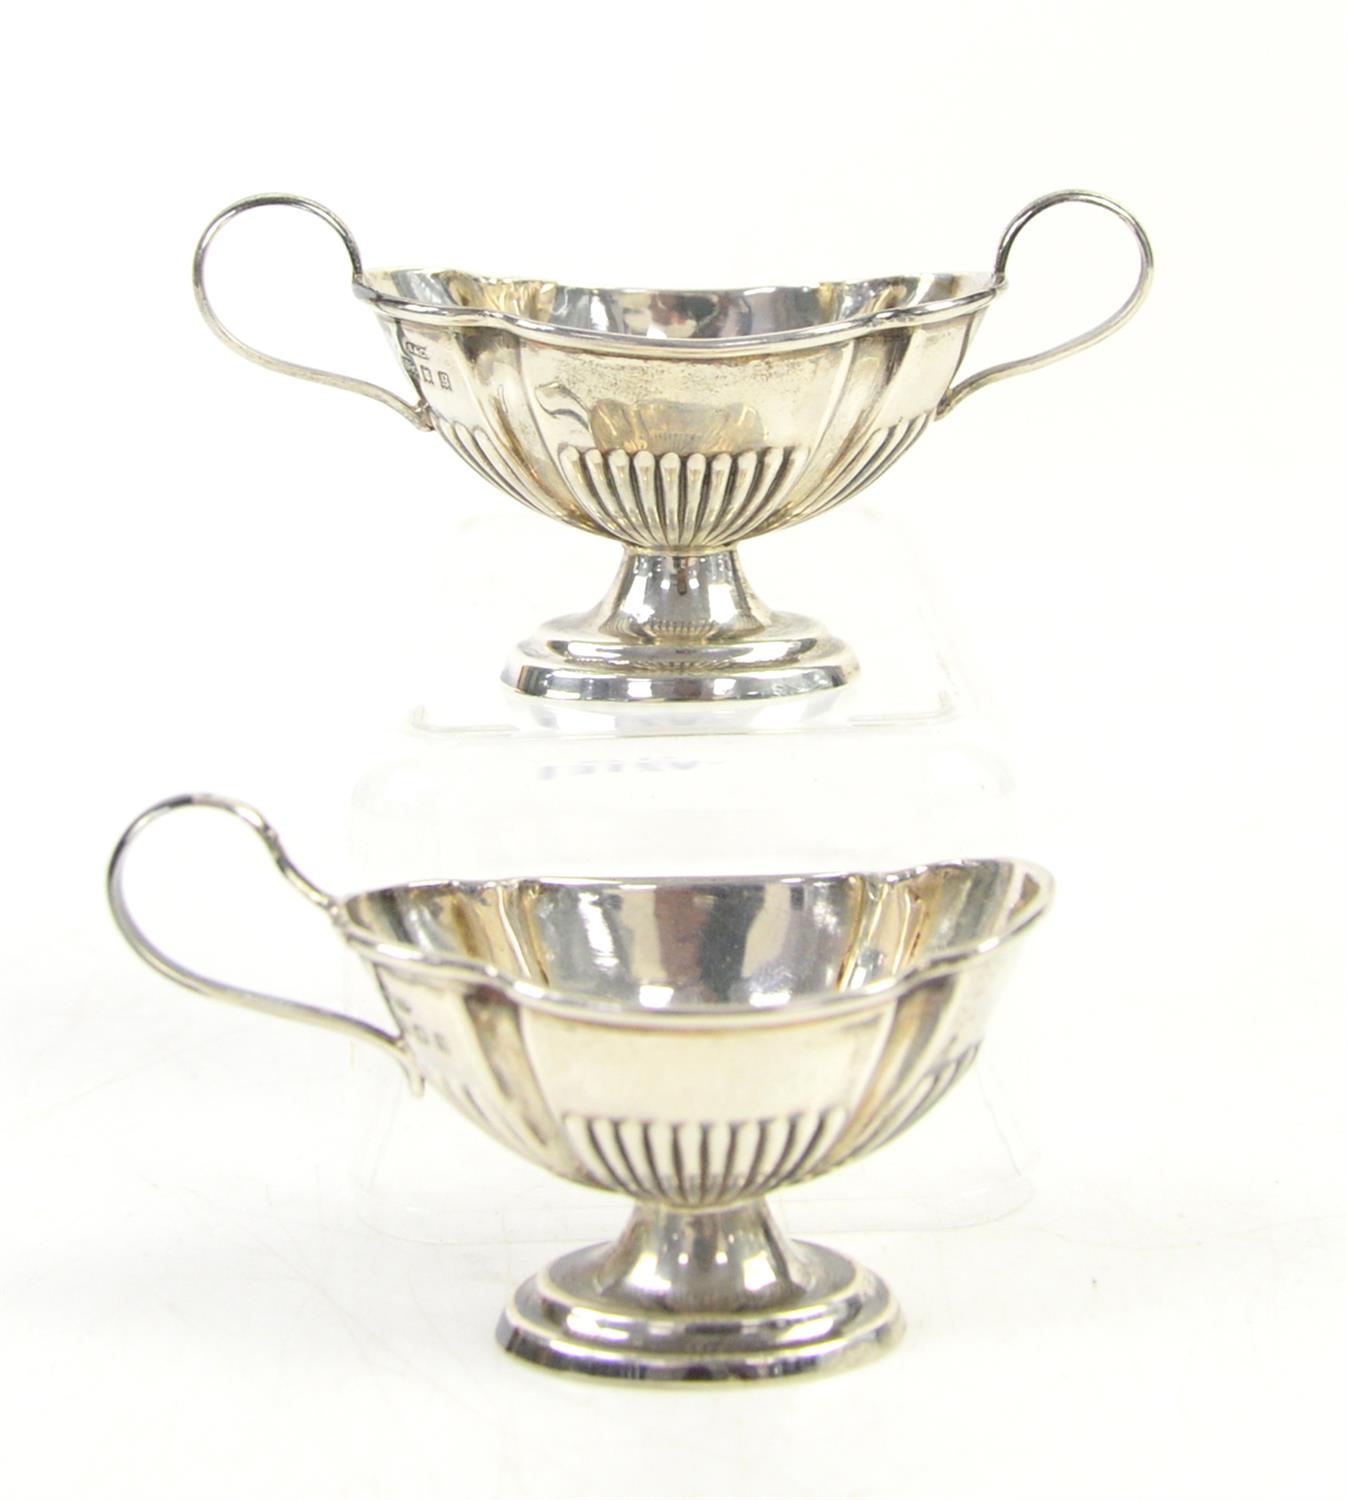 Novelty silver salts in the form of a sugar bowl and creamer, by Skinner and Co, London 1922